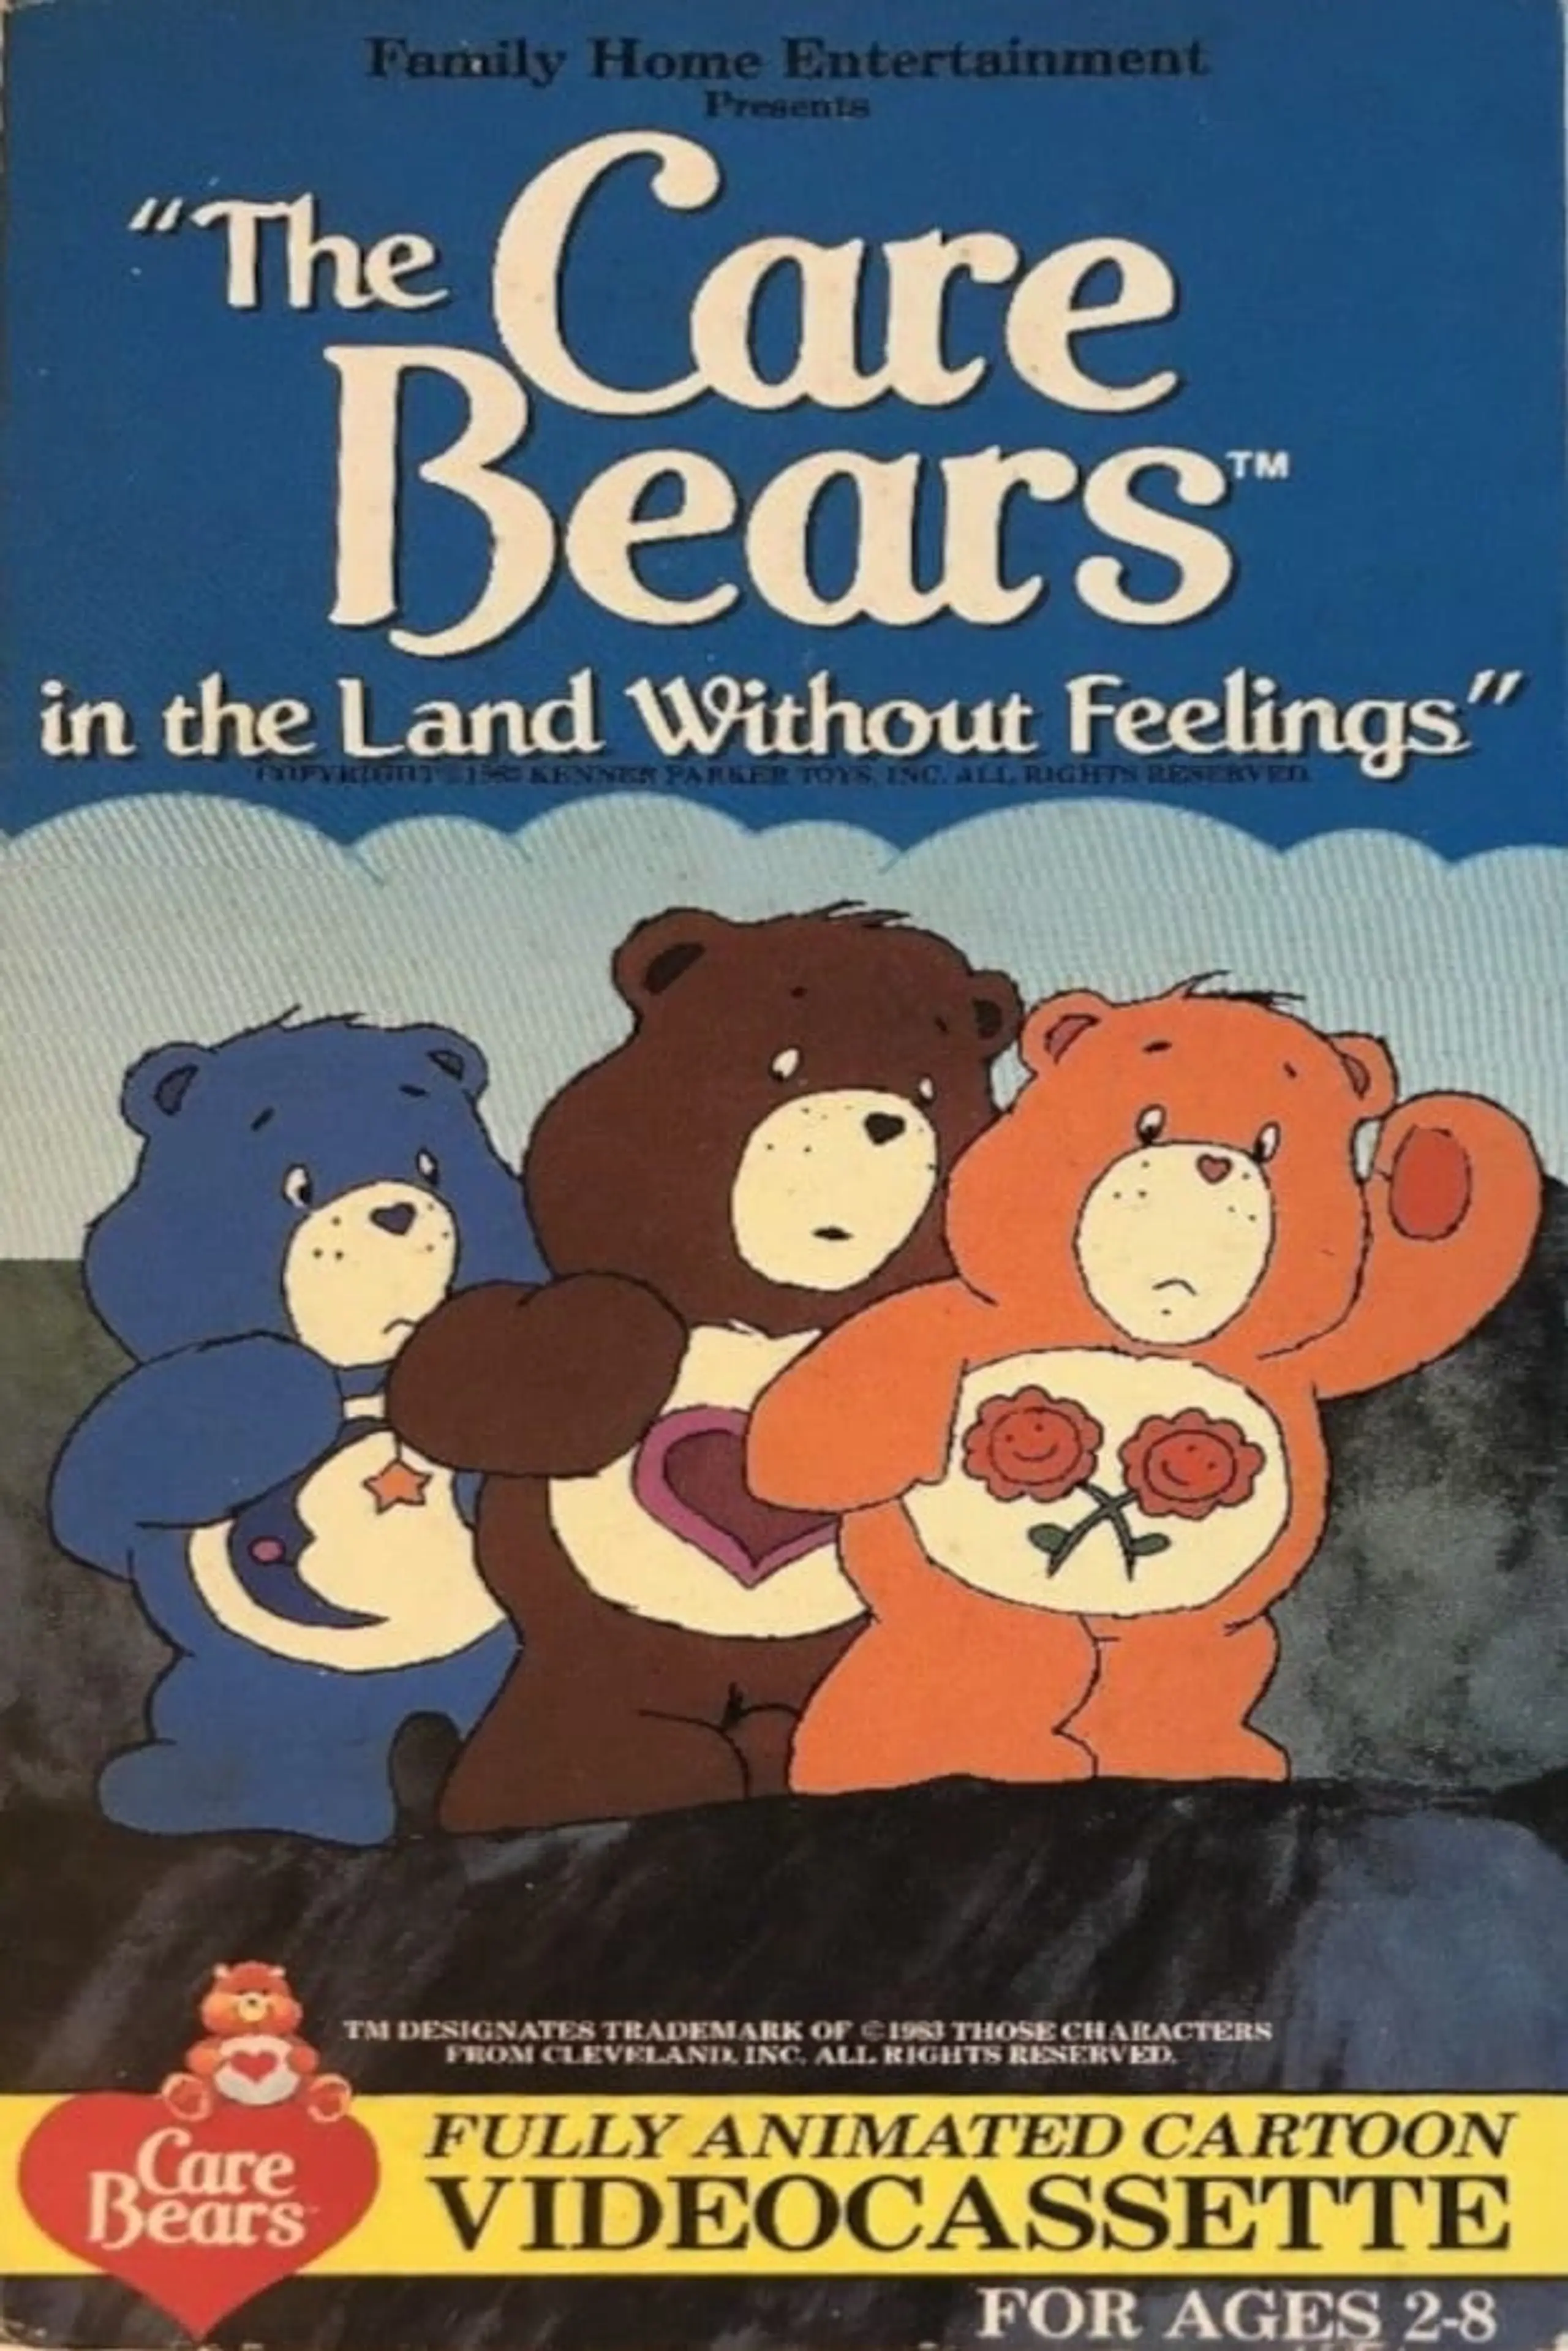 The Care Bears in the Land Without Feelings